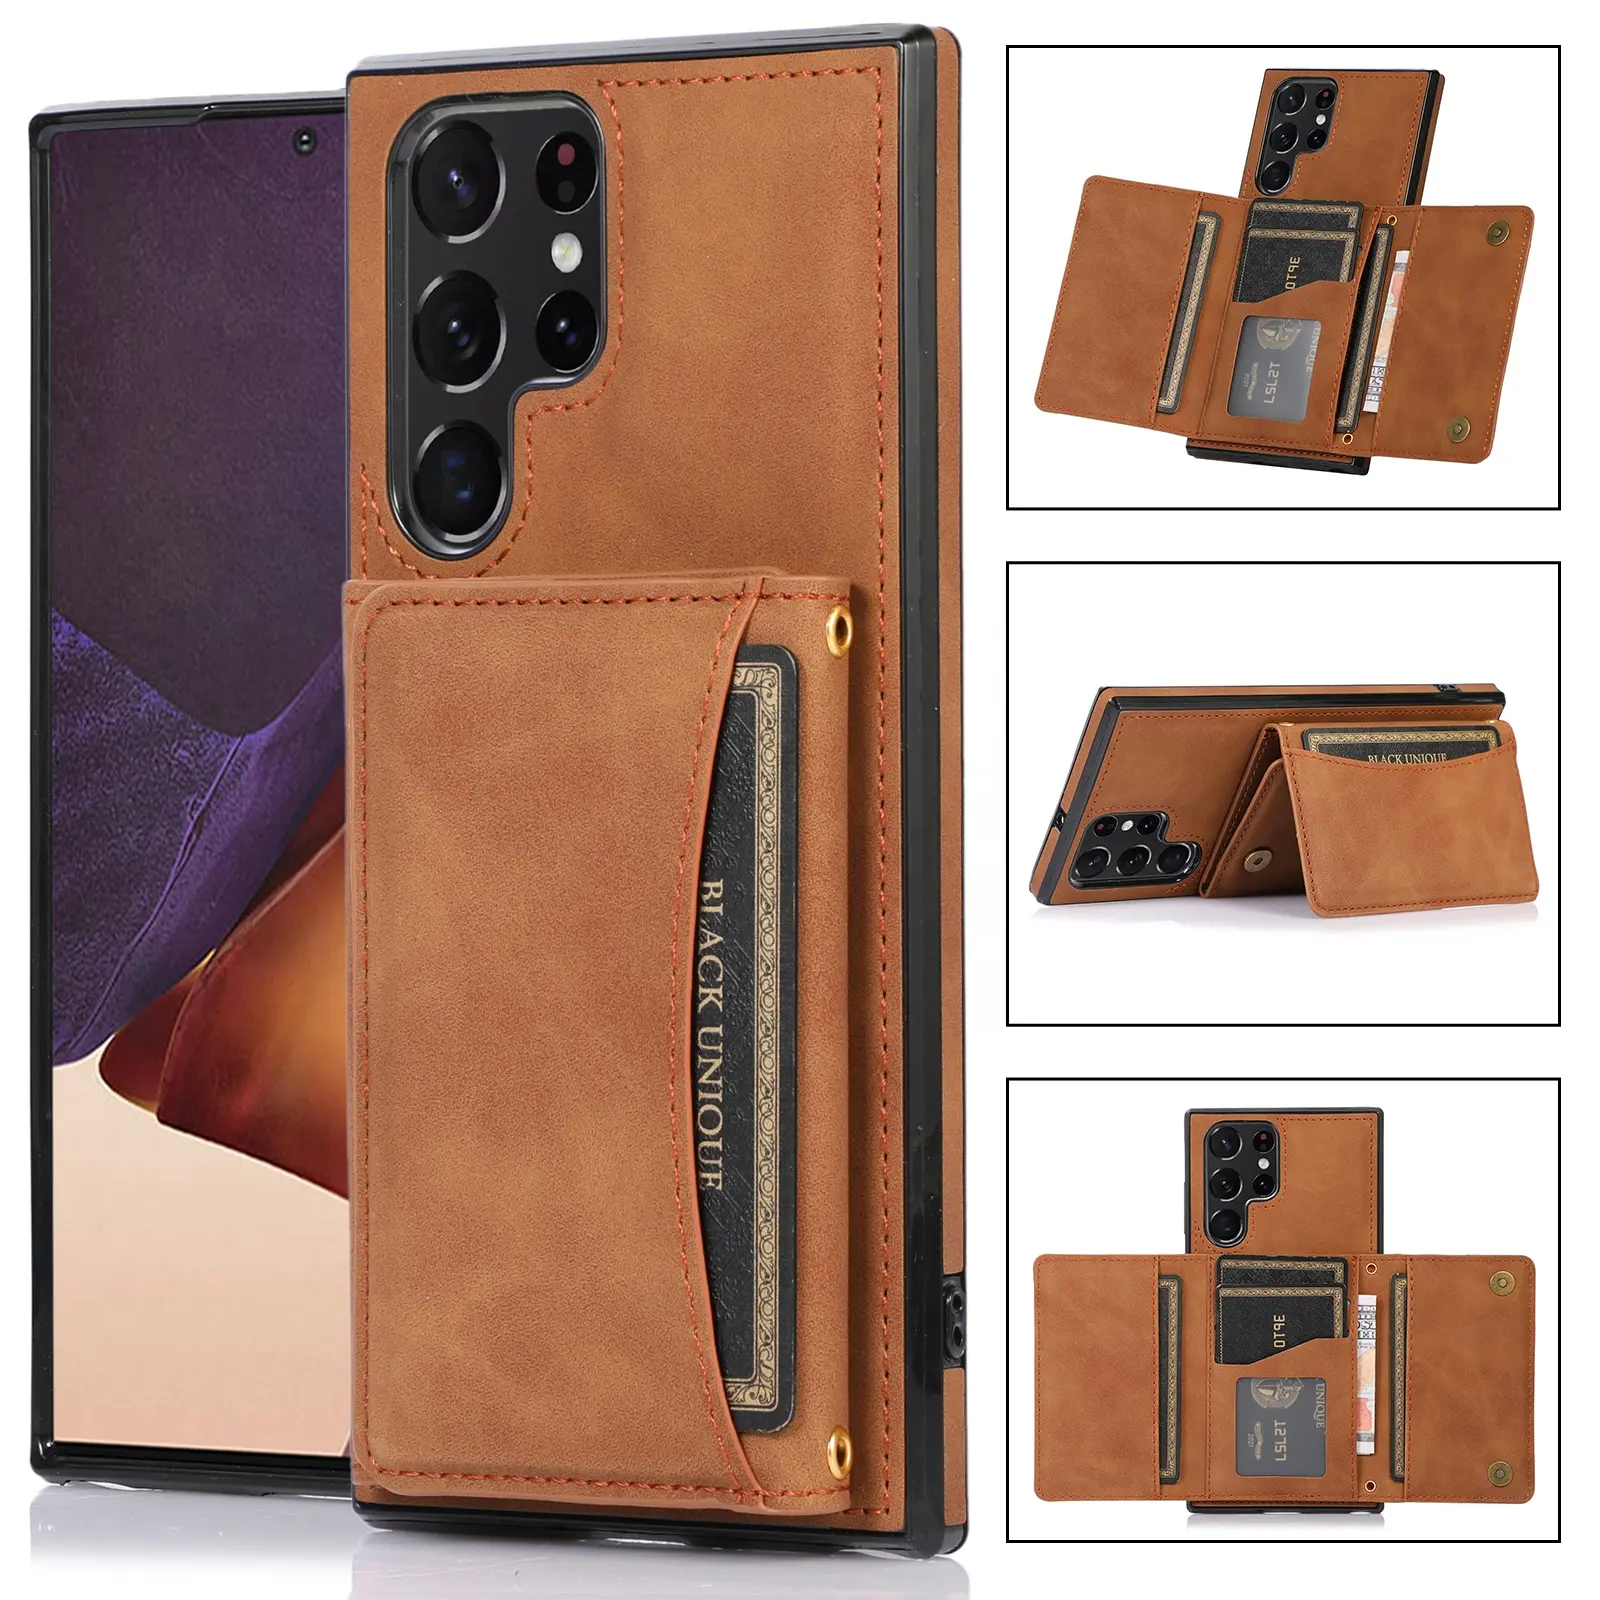 New pu flip leather wallet mobile phone case for Samsung s22 s22 plus hard back credit card slot phone case for galaxy s22 ultra